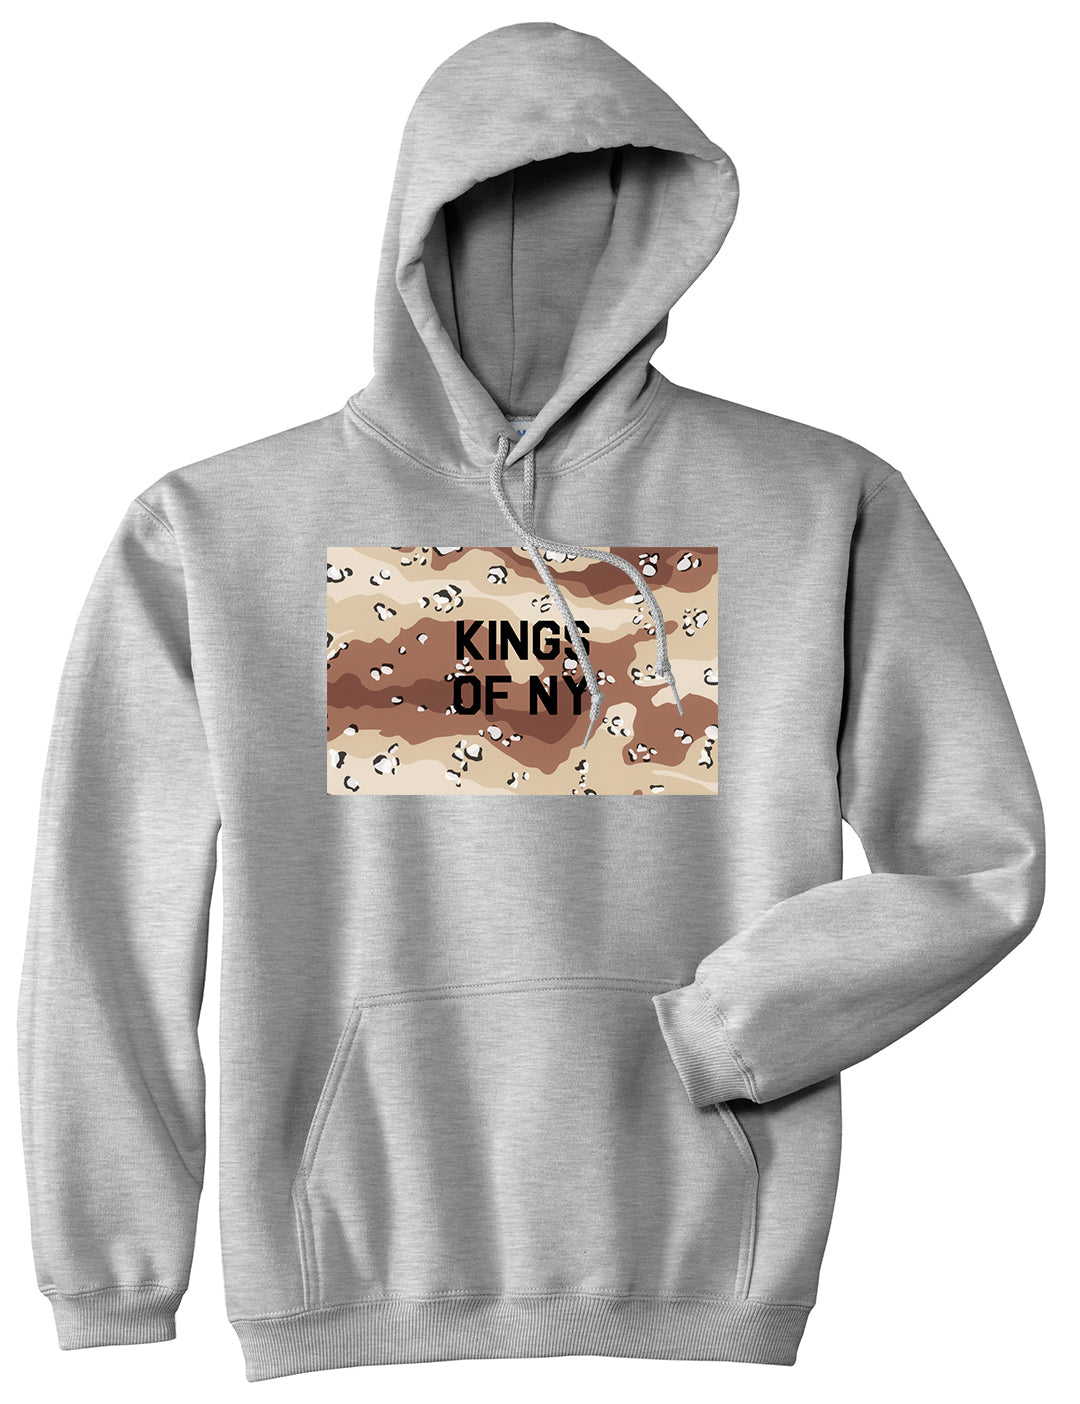 Desert Camo Army Pullover Hoodie in Grey